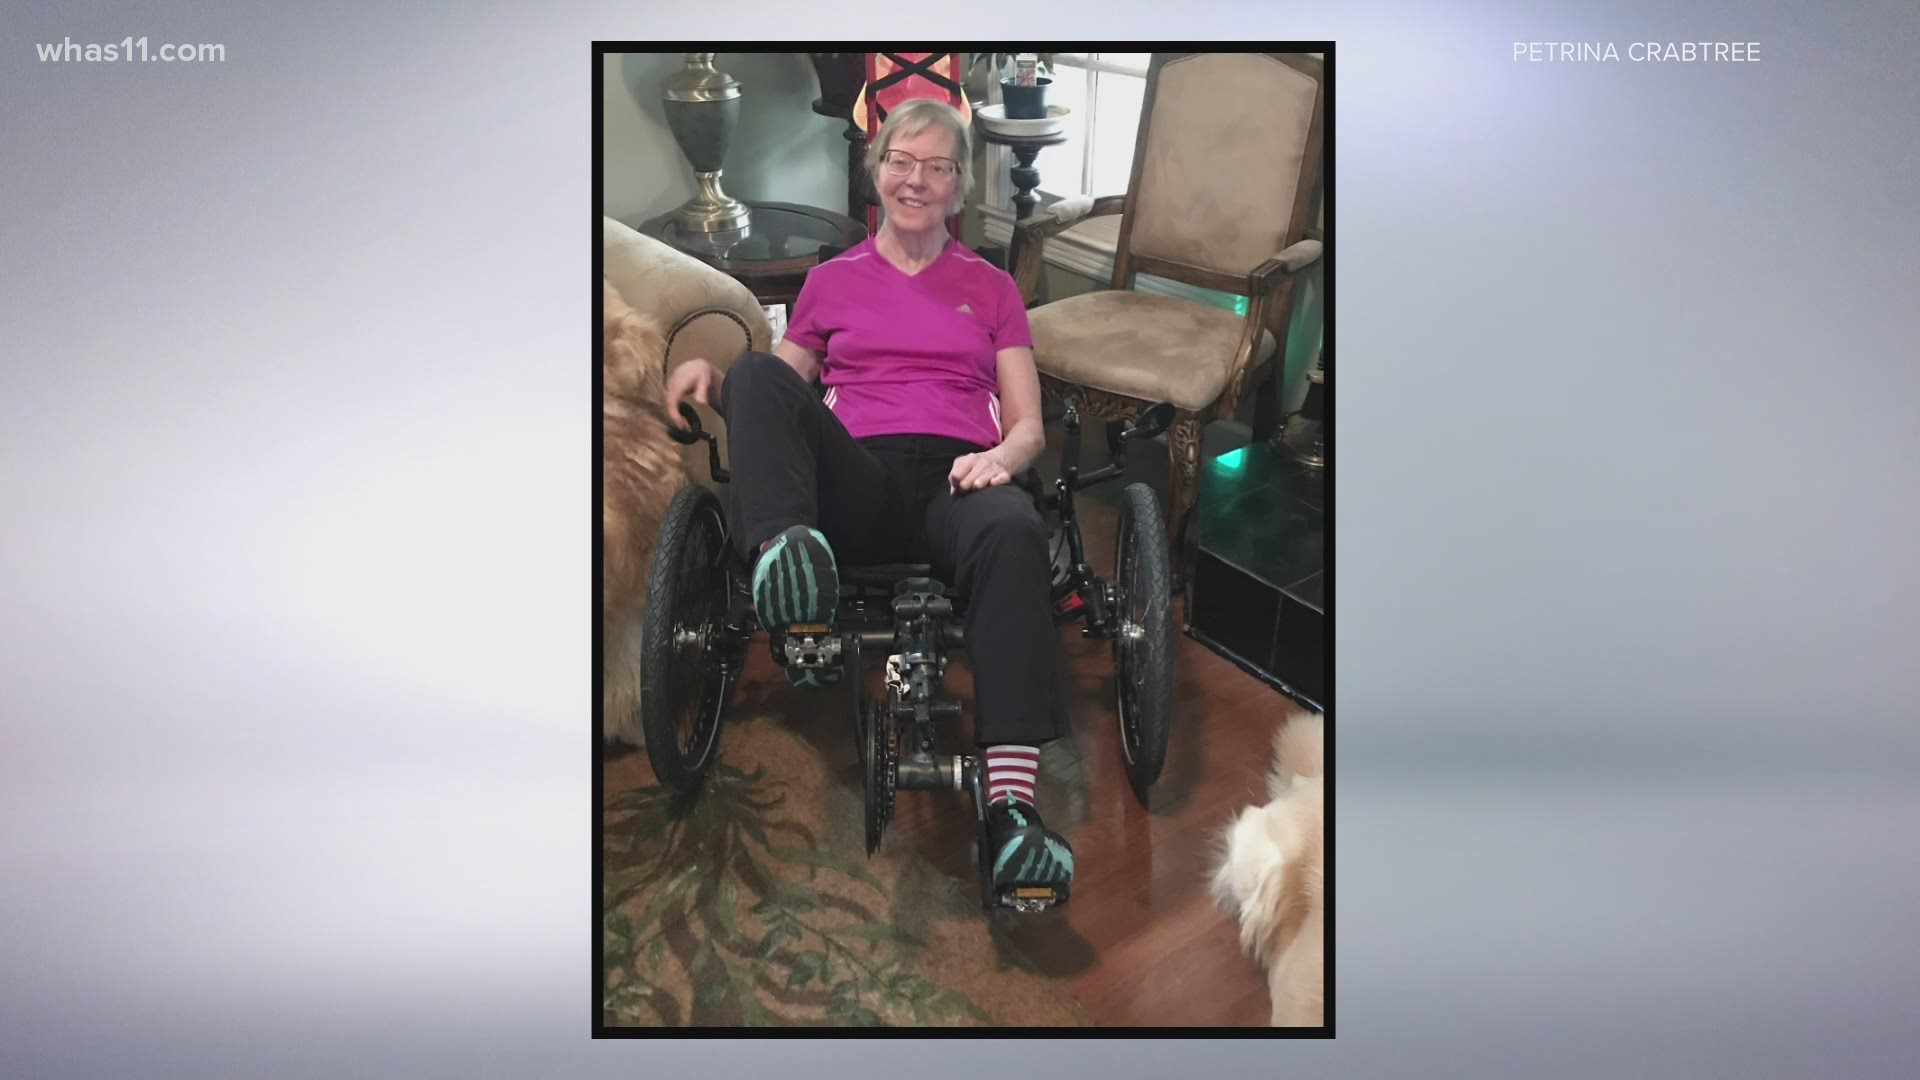 Petrina Crabtree was injured in a bicycle crash in 2020 that damaged her spinal cord.